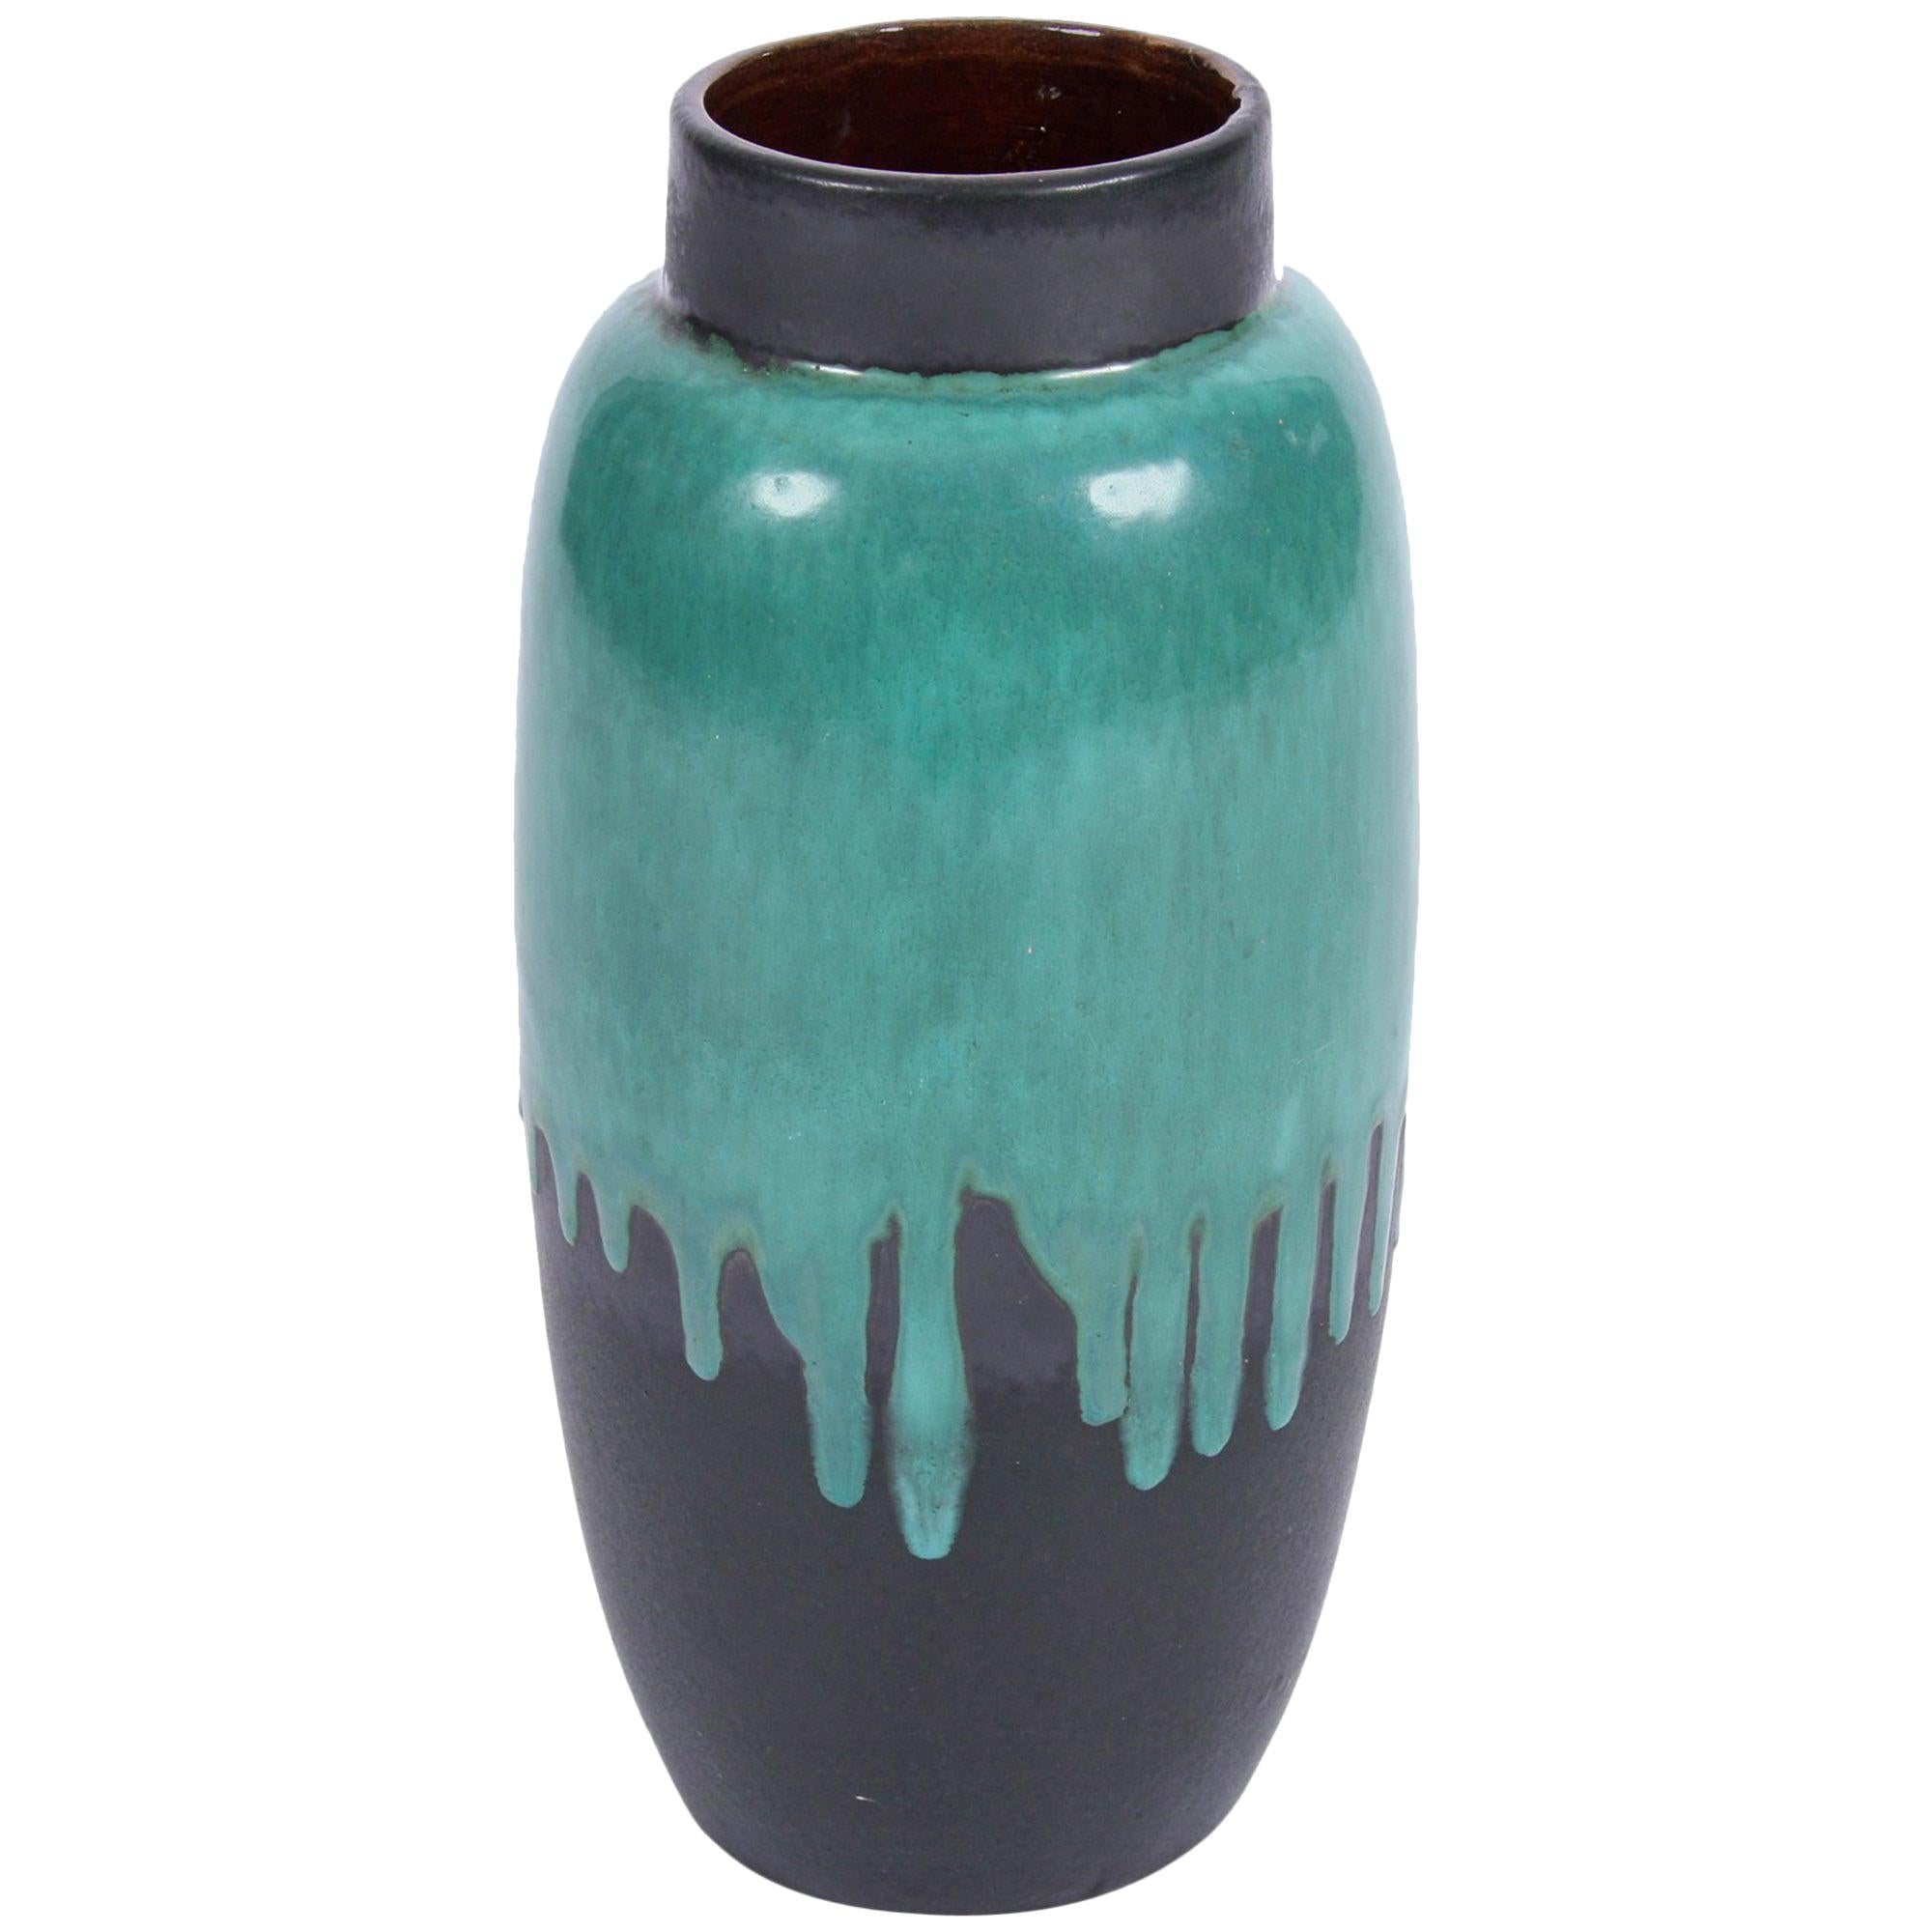 Vintage 1960s German Green Ceramic Vase with Paint Drip Effect For Sale